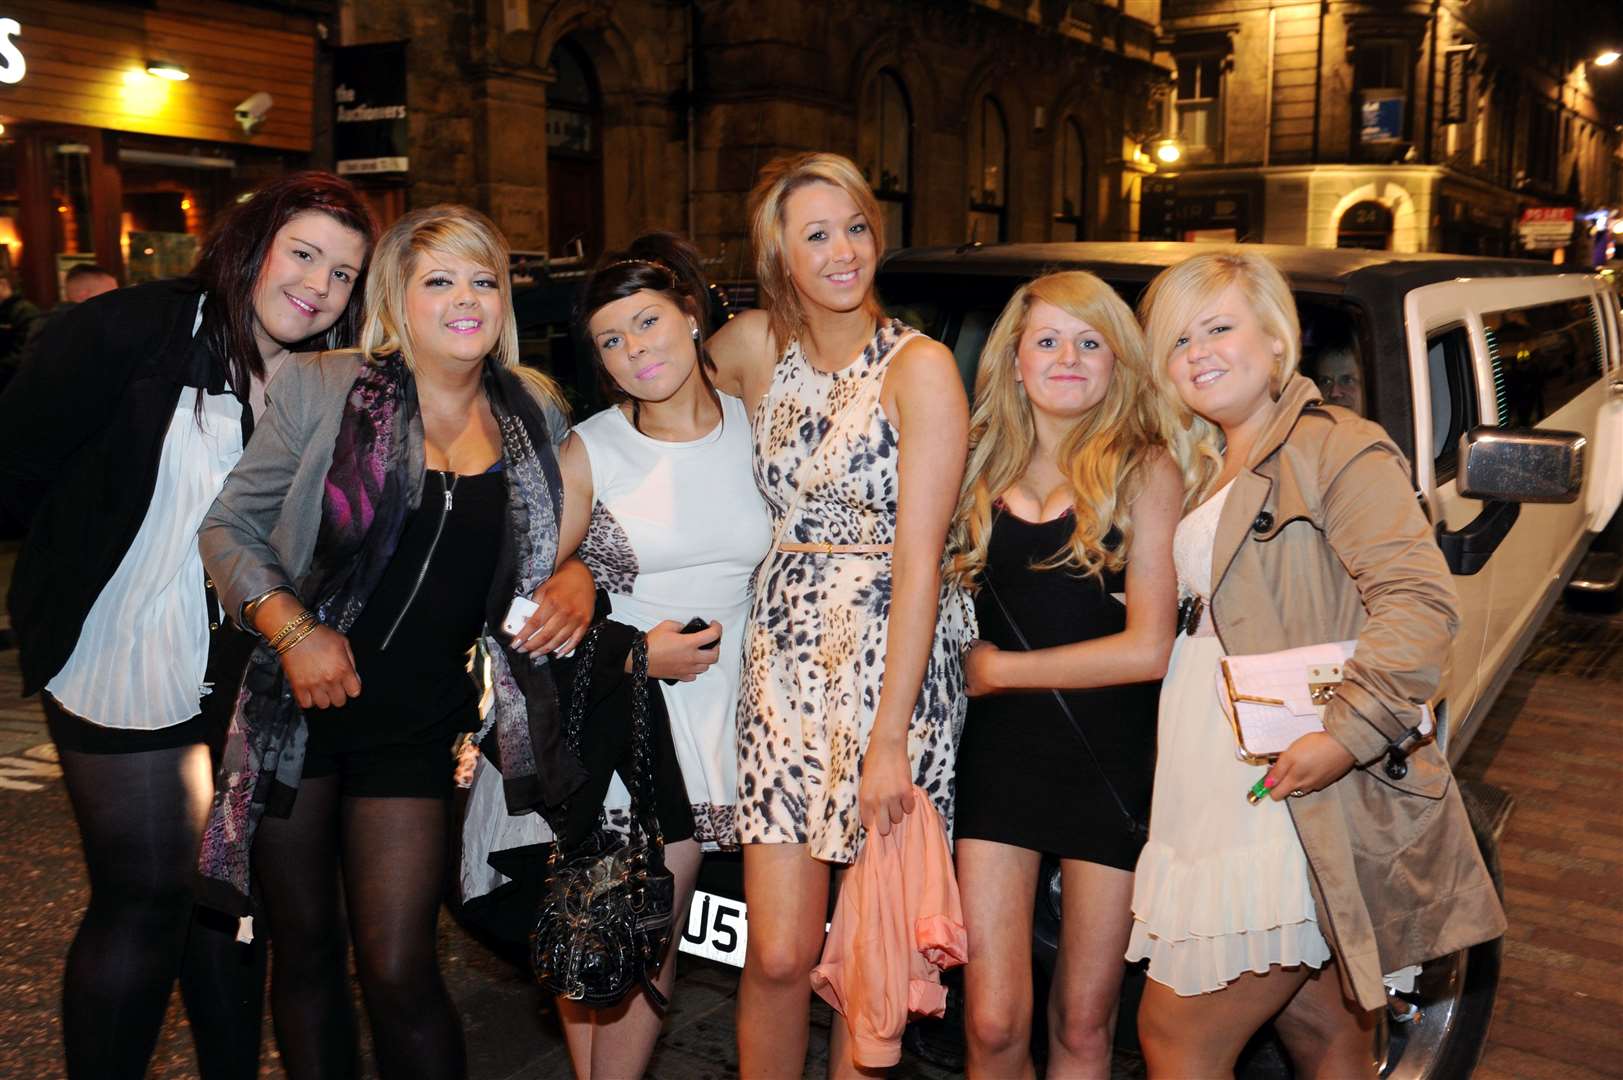 Arriving in town in a limousine is 21st birthday girl Amanda Christodoulatos (centre) with friends.